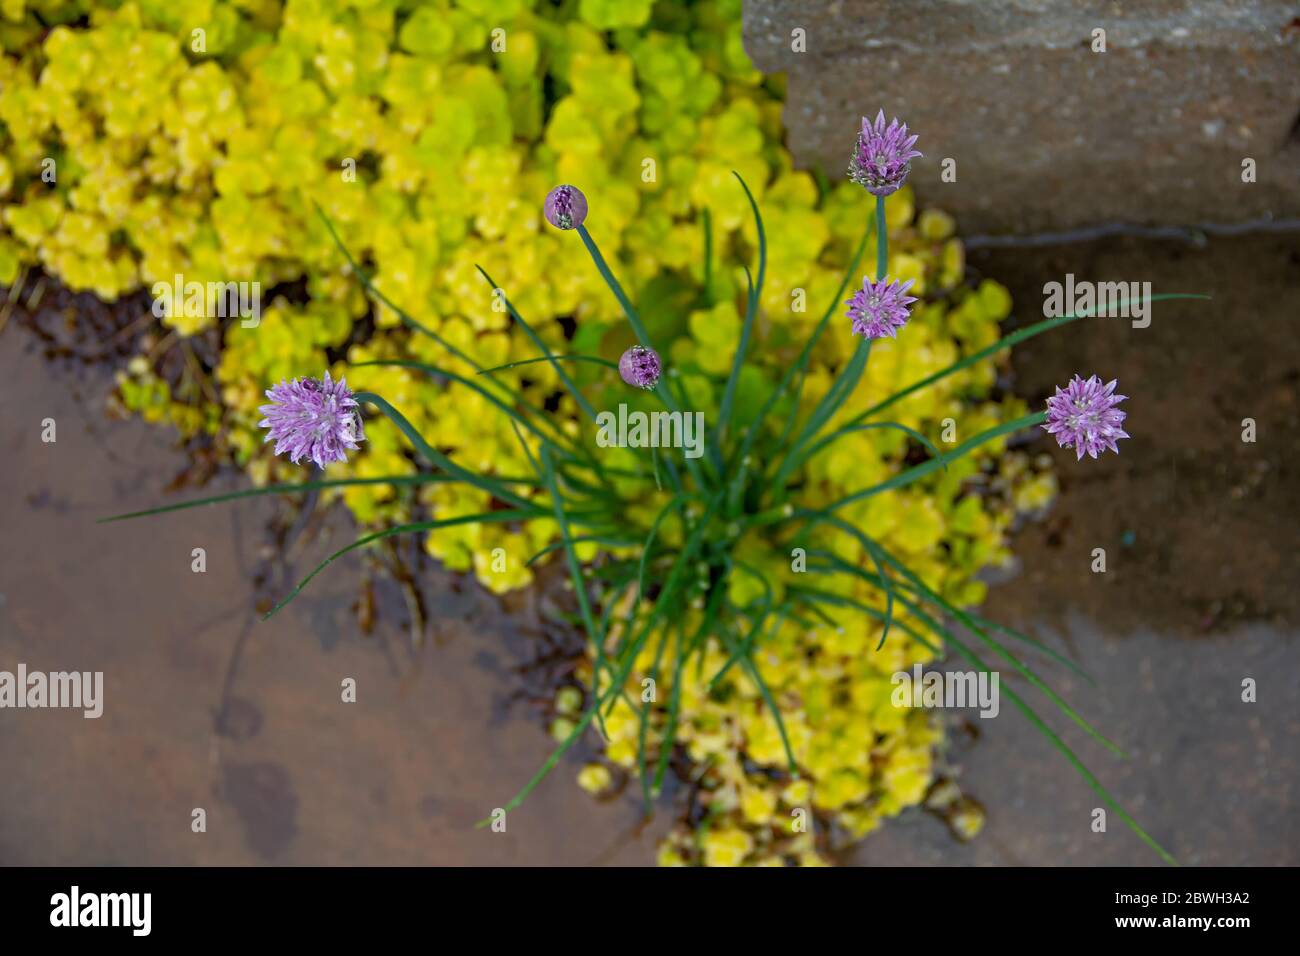 Blooming chives plant and Creeping jenny (Lysimachia nummularia) as a background after the rain Stock Photo